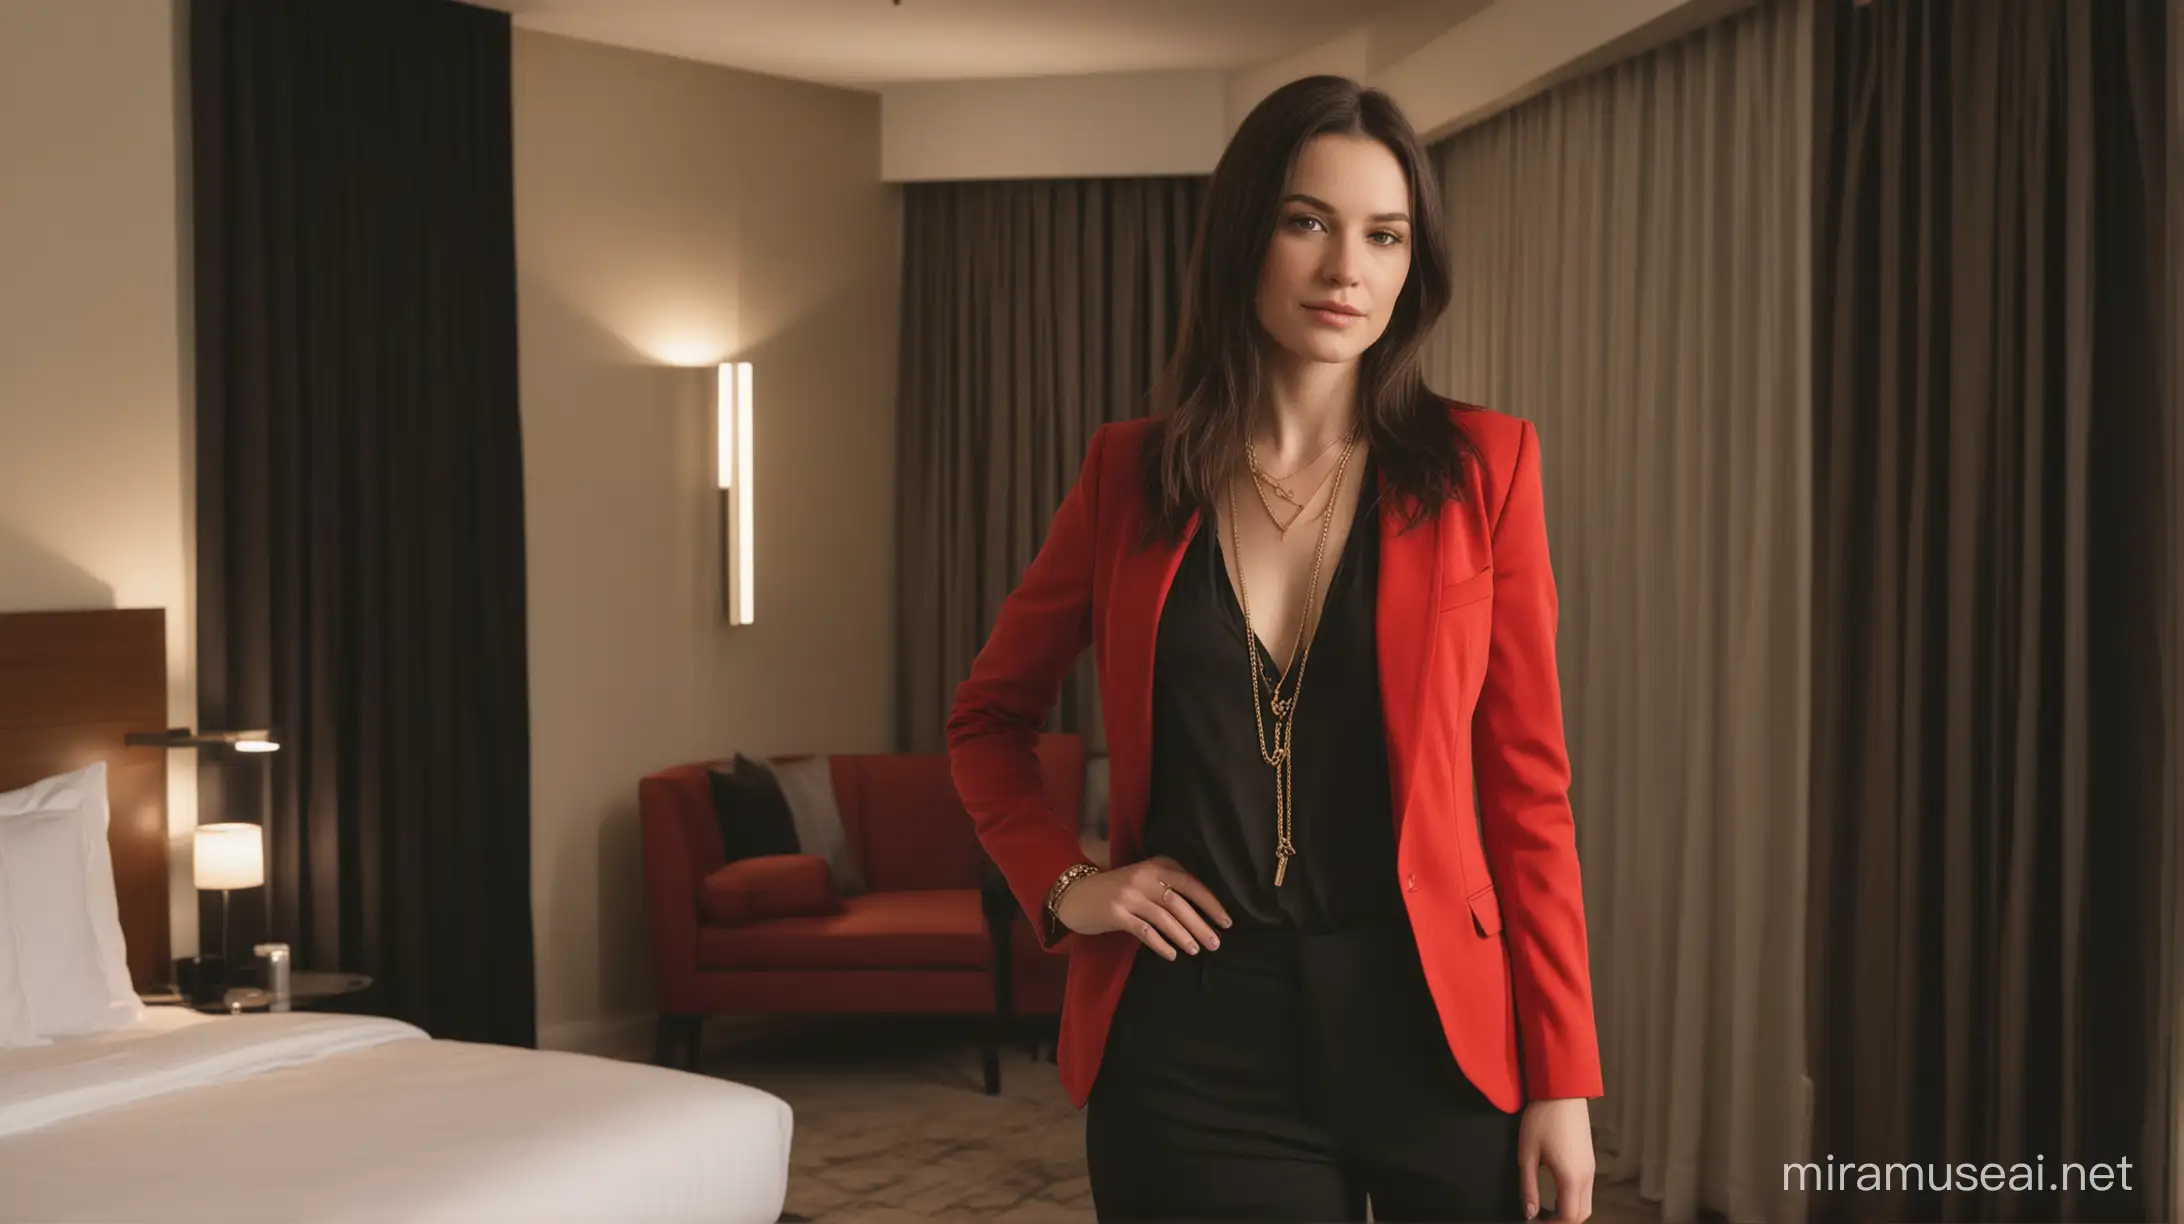 30 year old white woman standing in a hotel room in a high rise modern hotel in the evening. She has long dark brown hair, pale skin, wearing a red blazer, gold necklace with very low cut black shirt and black pants.